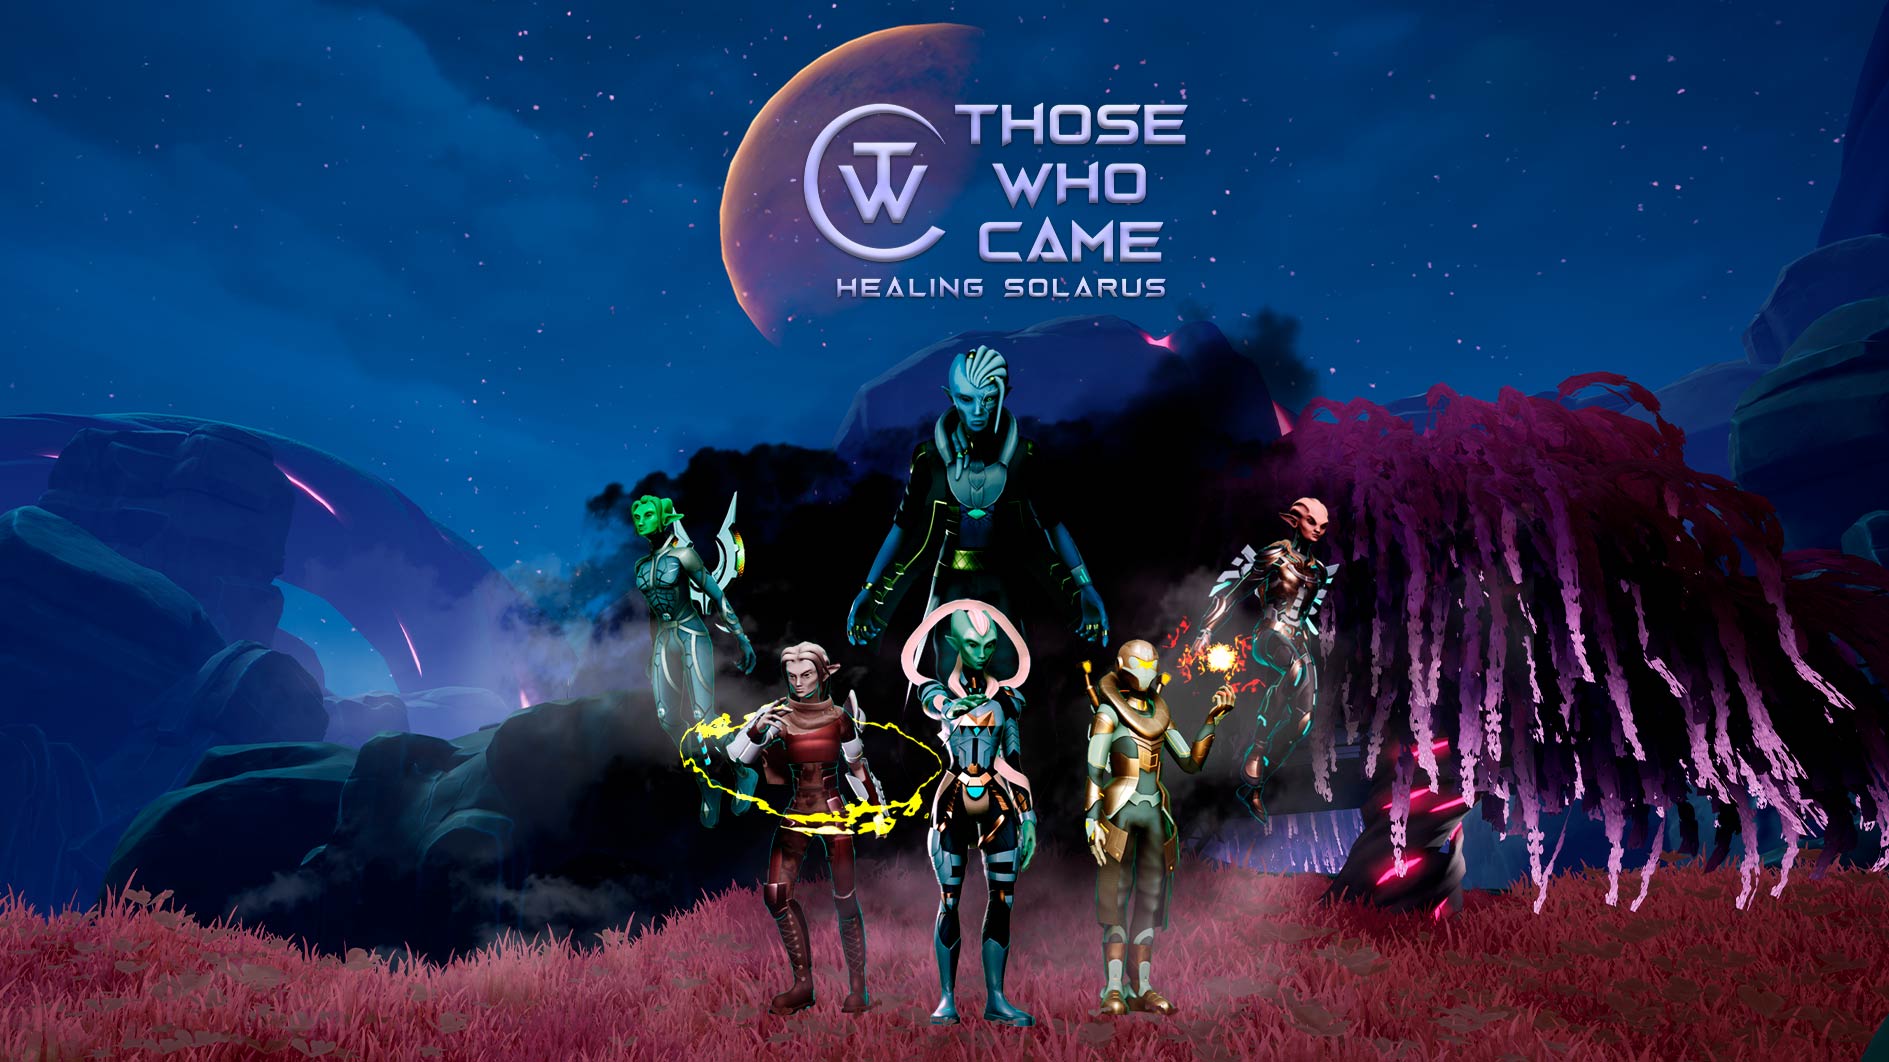 Those Who Came: Healing Solarus launches on Steam next week